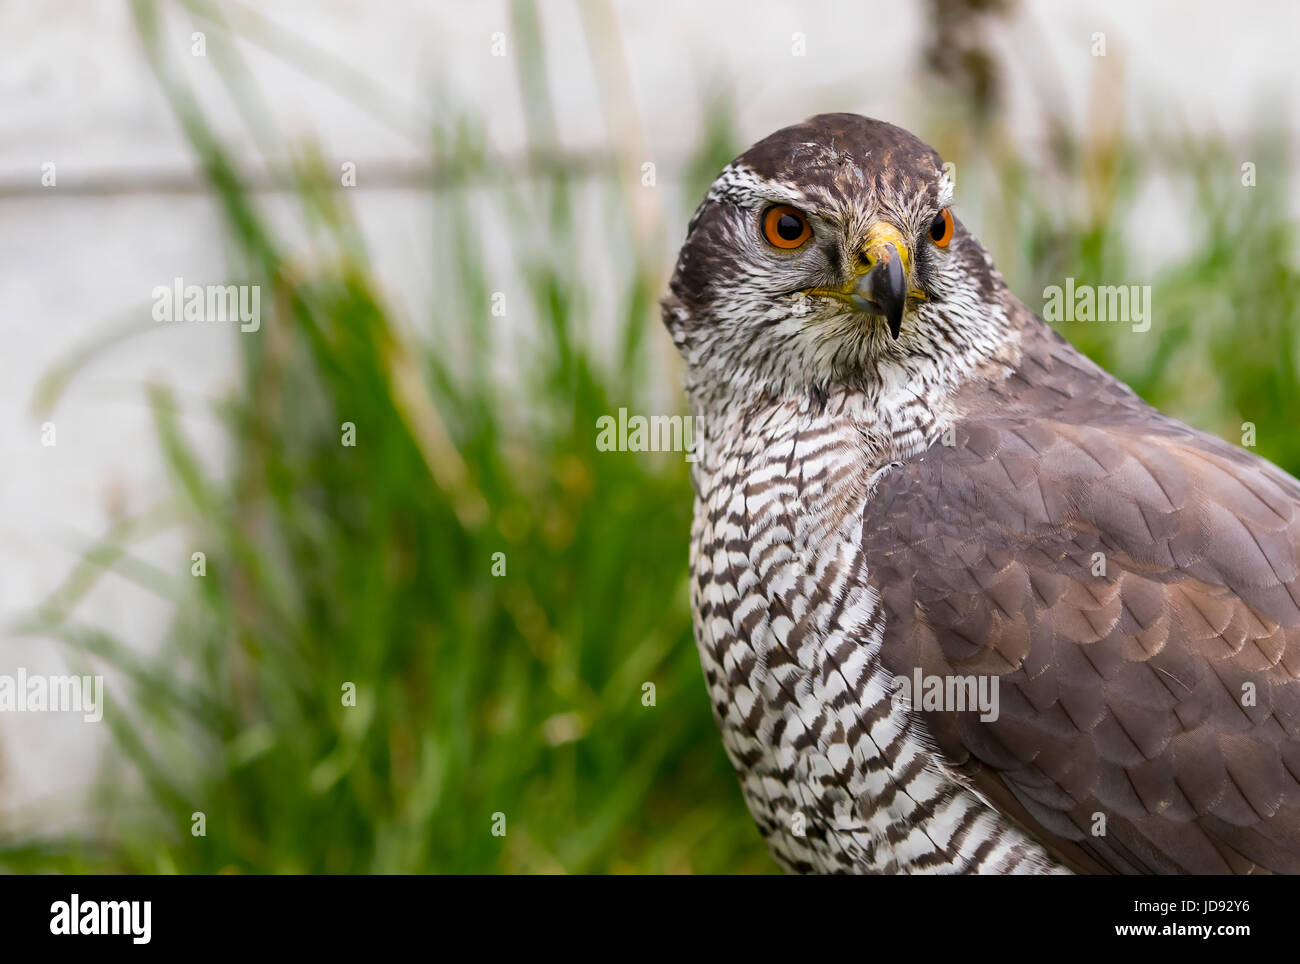 A Portrait of a Goshawk with a Piercing Stare Stock Photo